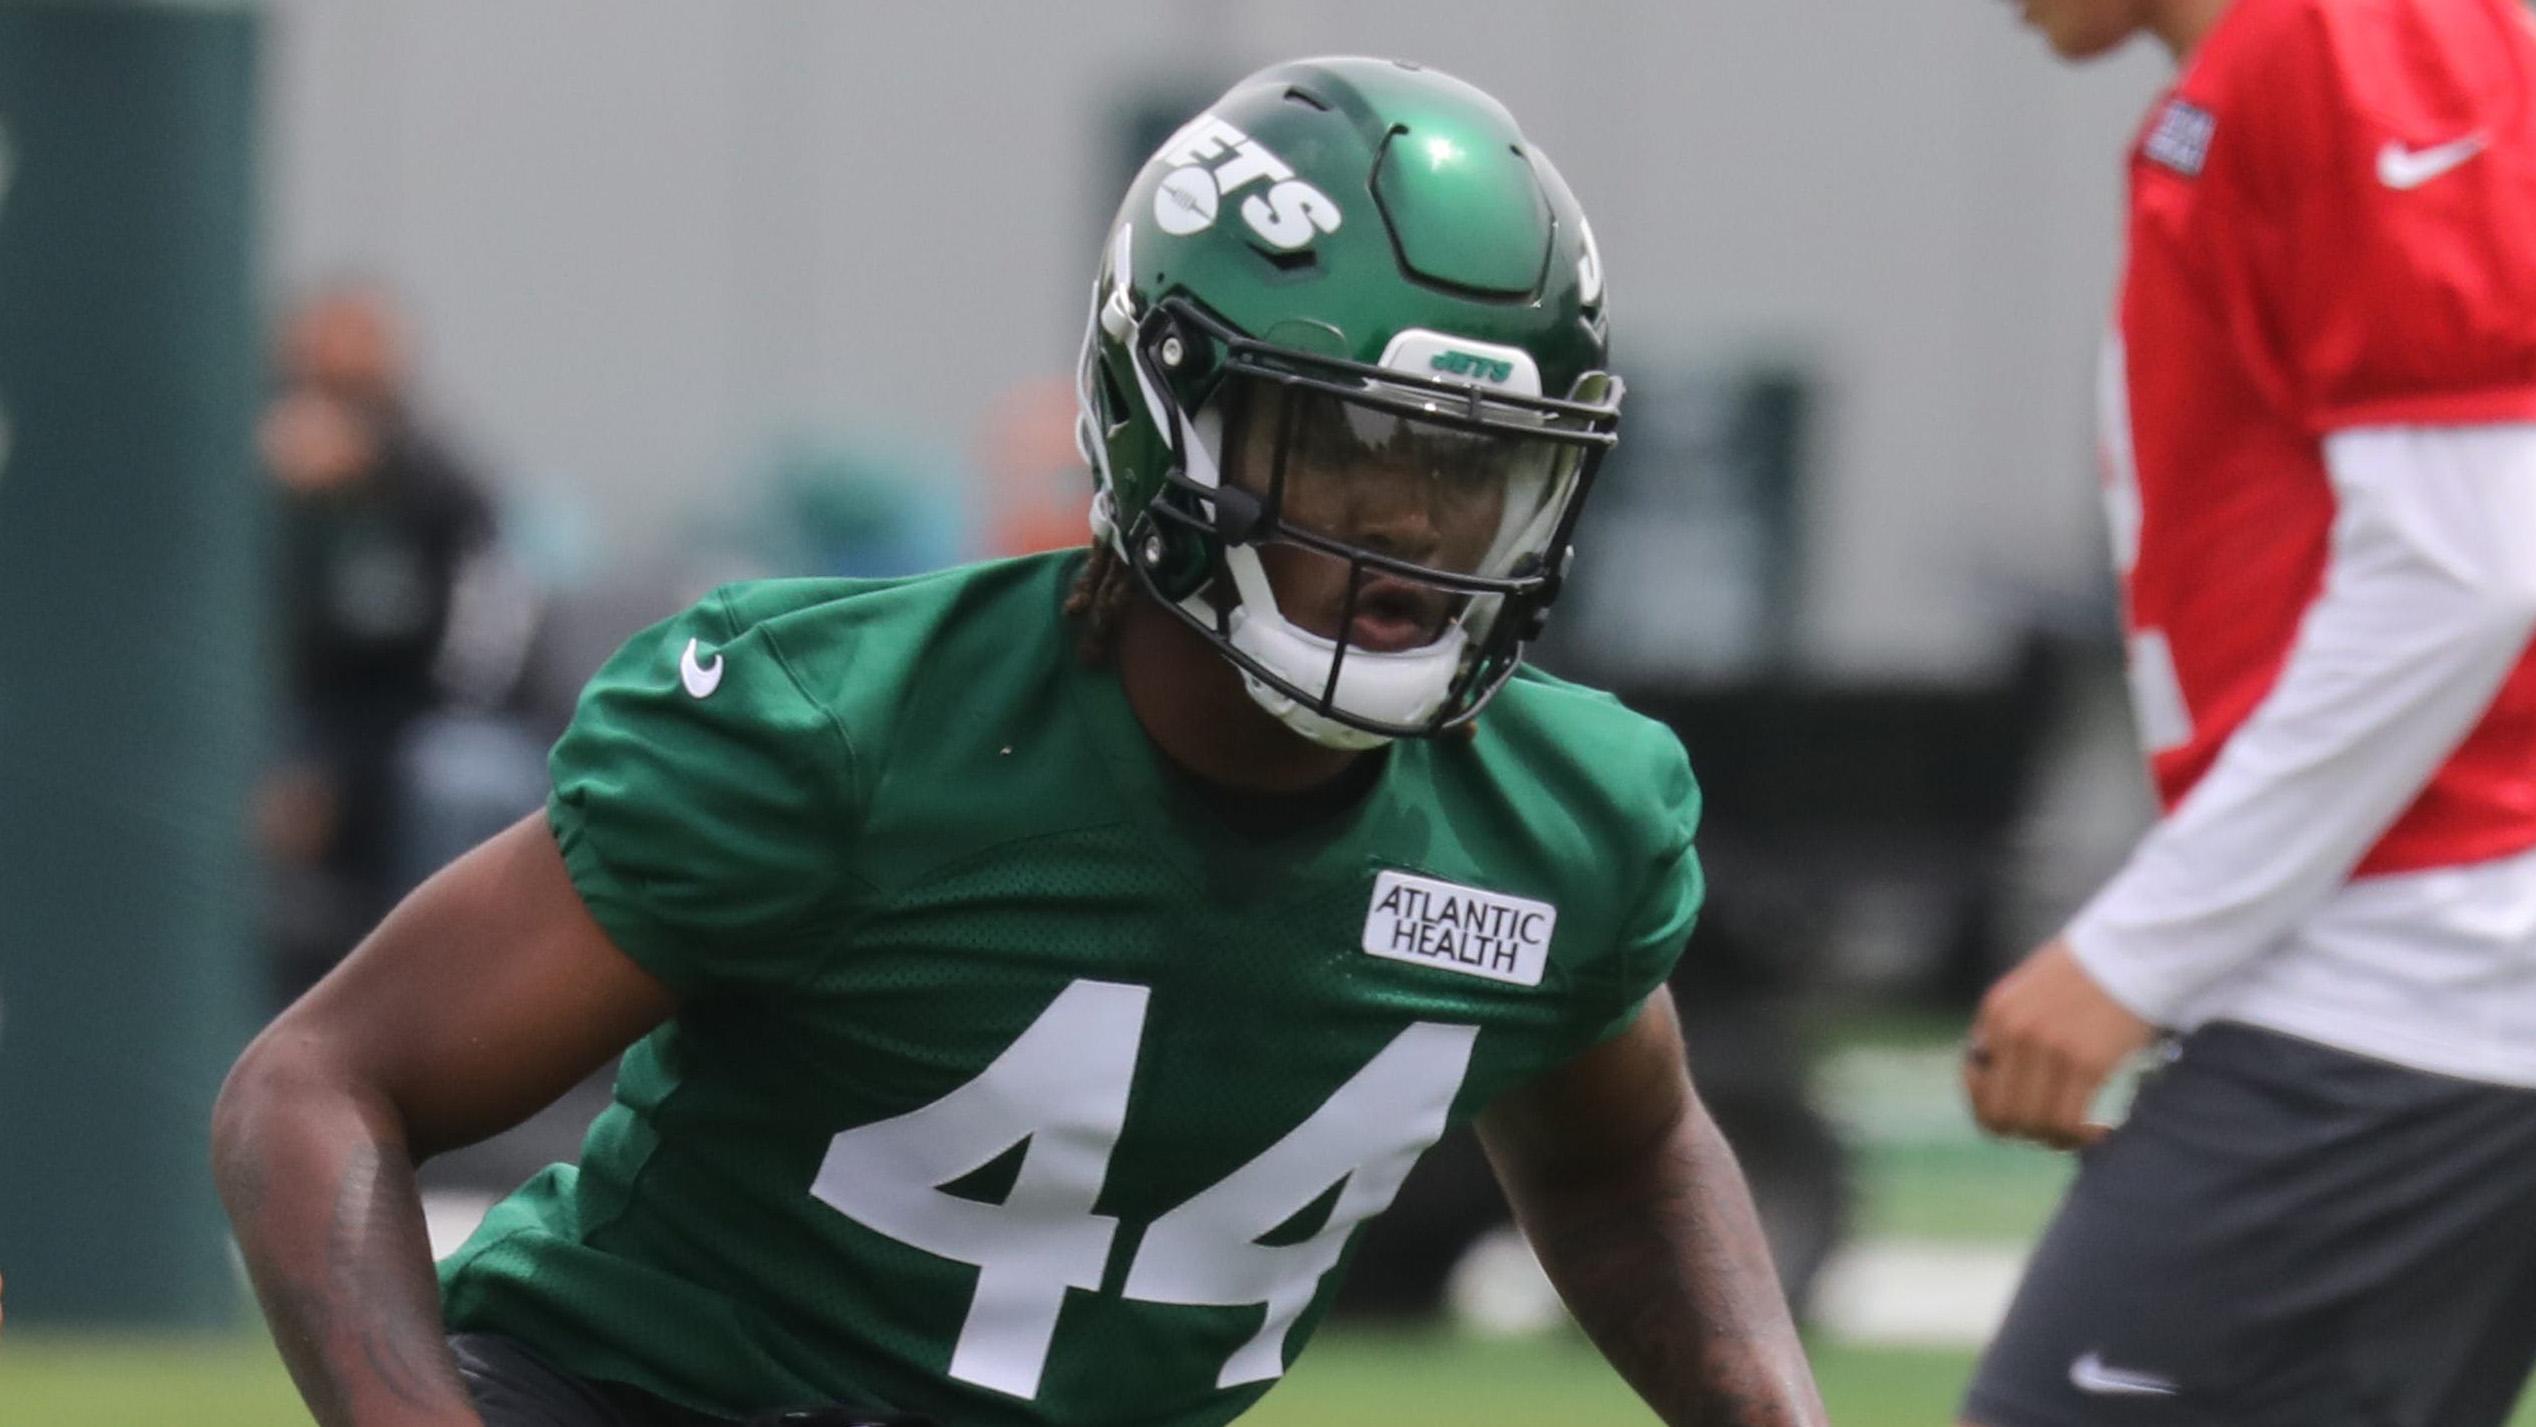 https://sny.tv/articles/jets-rookie-jamien-sherwood-on-lb-transition-scheme-wise-it-s-easy-for-me- / Chris Pedota, NorthJersey.com-Imagn Content Services, LLC